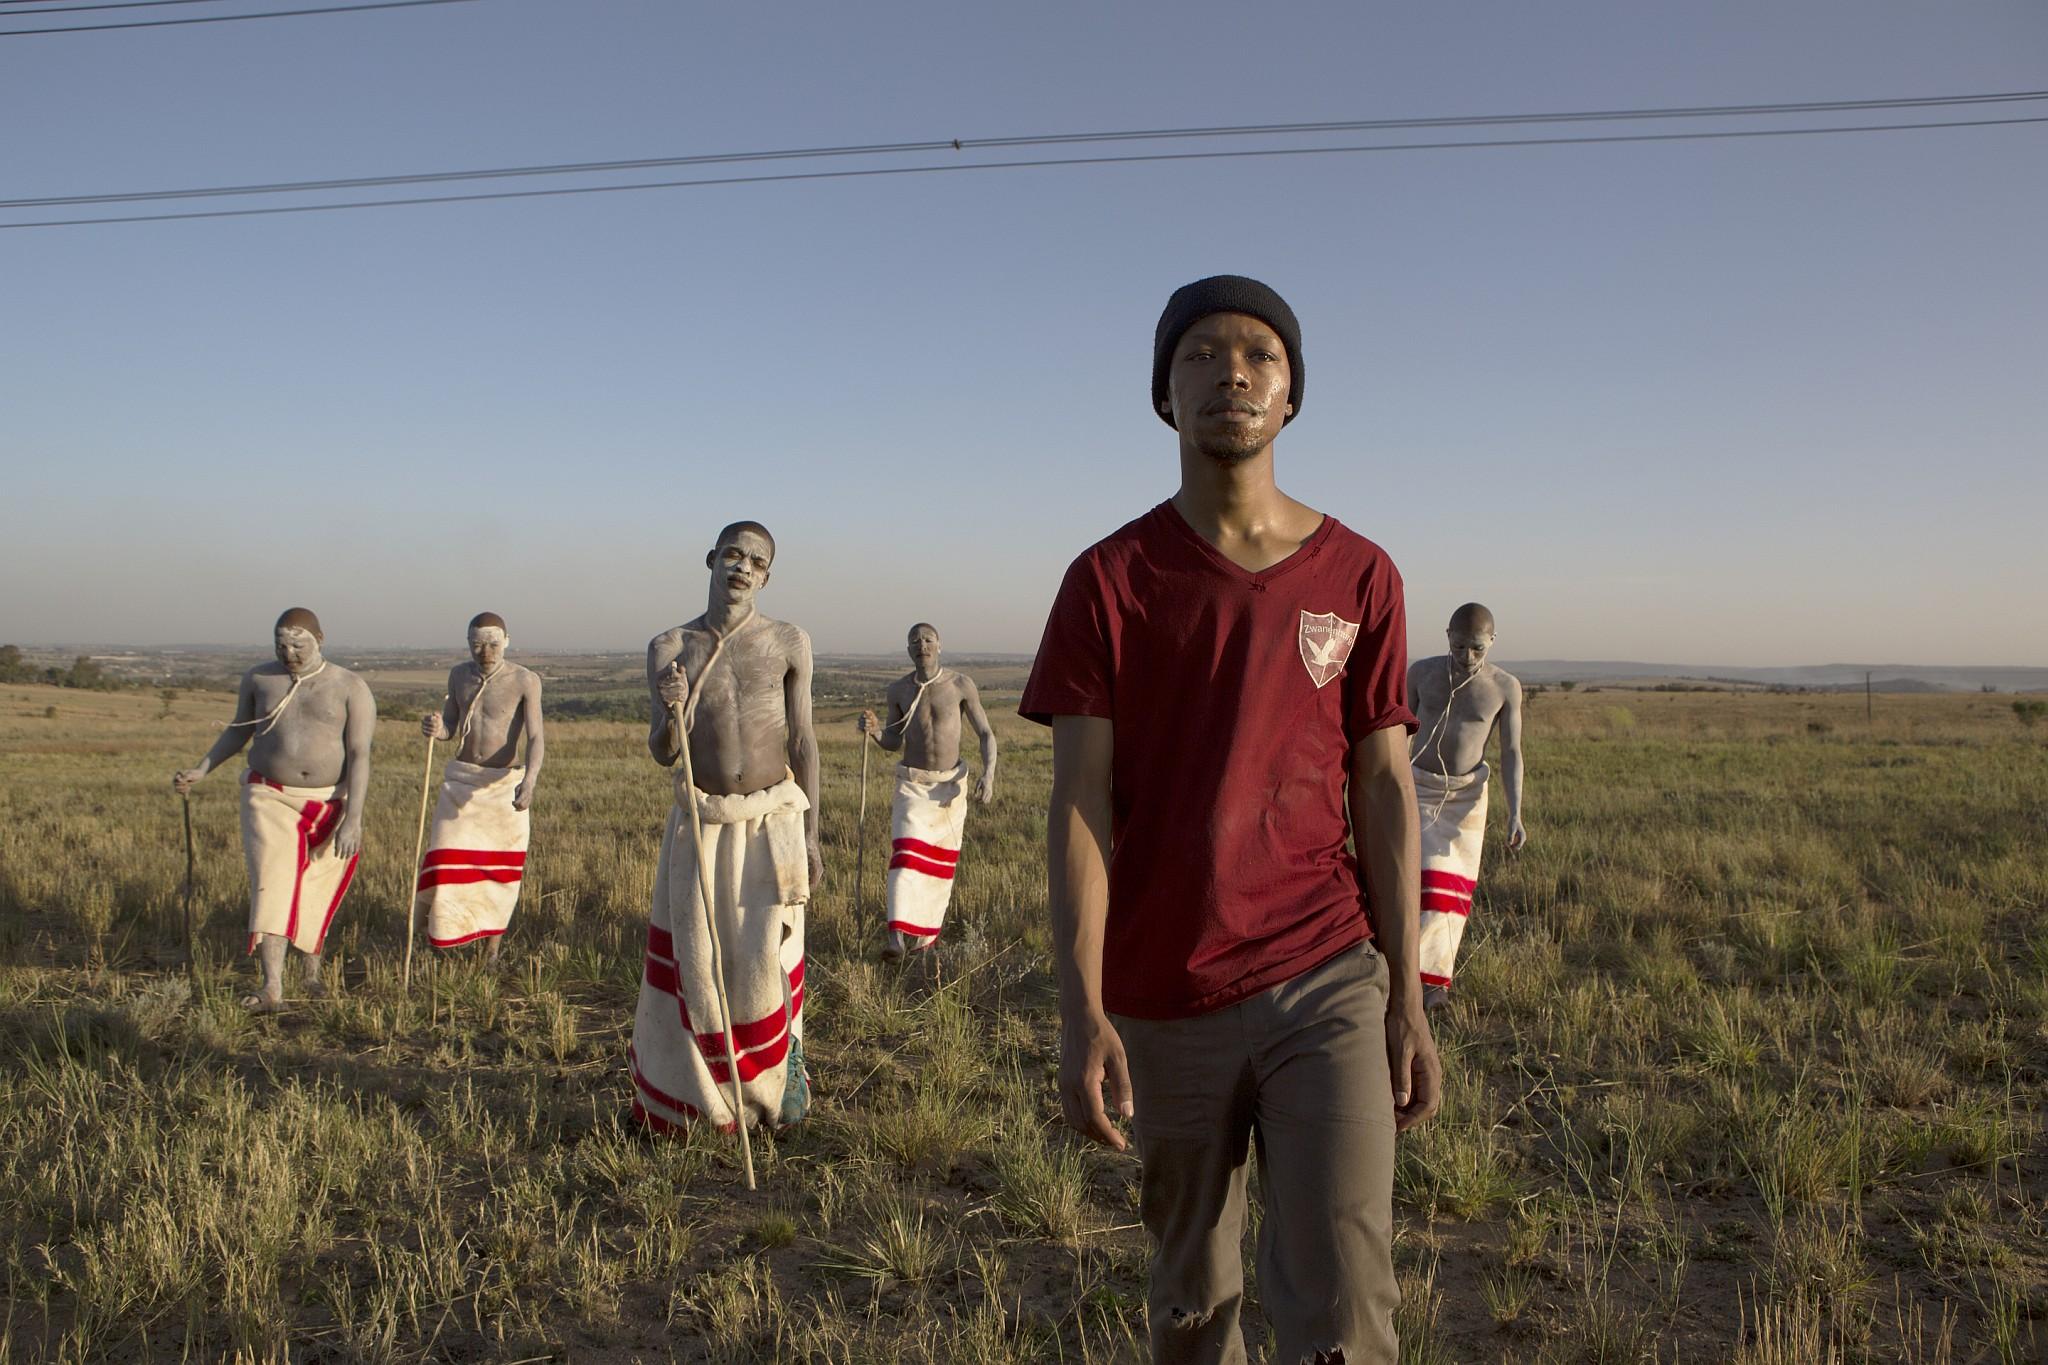 ‘The Wound’ follows the journey of Kwanda, a city boy from Joberg, who is undergoing his rite of passage into manhood